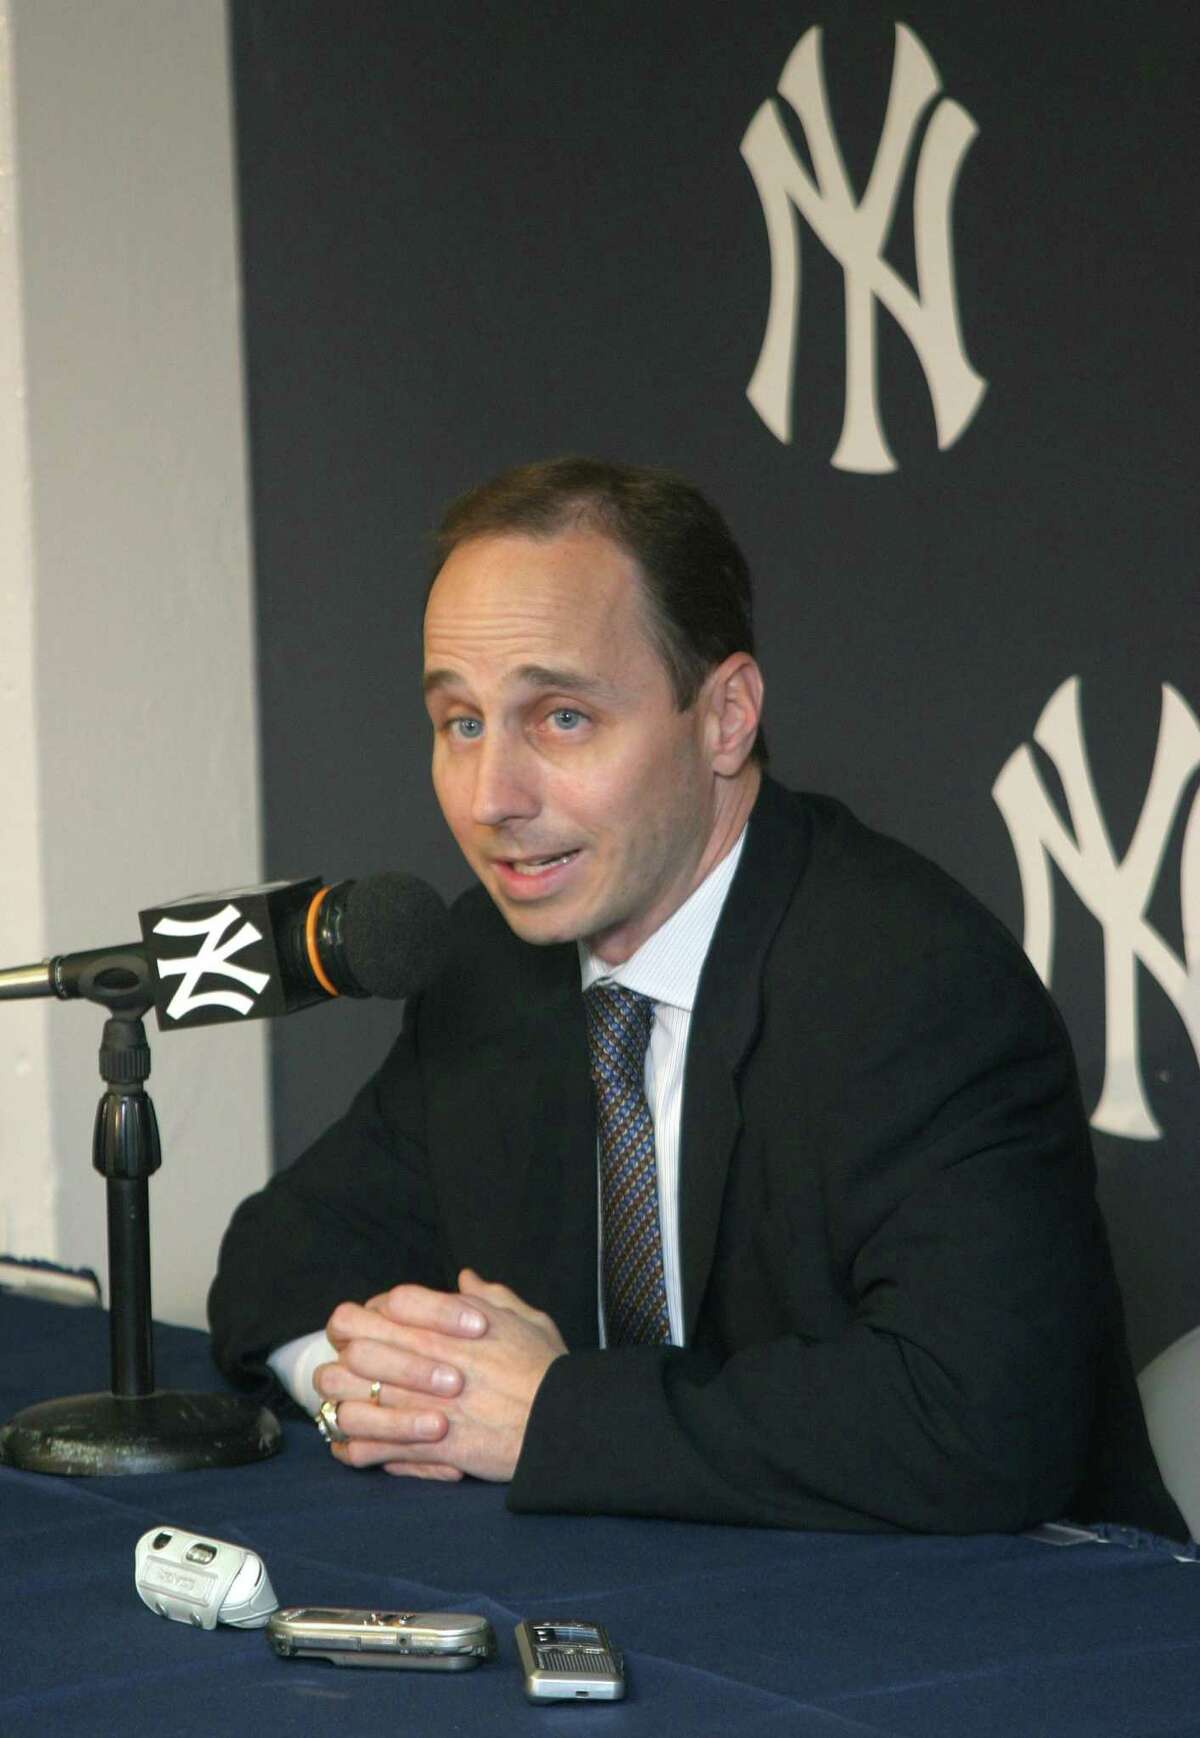 Join the Family Centers of Greenwich for a fundraising breakfast called “Talking Baseball with Brian Cashman,” at 7:30 a.m. Friday at private waterfront home in Darien. The New York Yankees general manager will give his outlook for the next season. Former Yankees first baseman Mark Teixeira of Greenwich will also be on hand. The event supports Family Centers, which has a network of health, education and human service programs that assist more than 21,000 children and families each year. For more info and tickets, go to www.familycenters.org/product/Cashman.